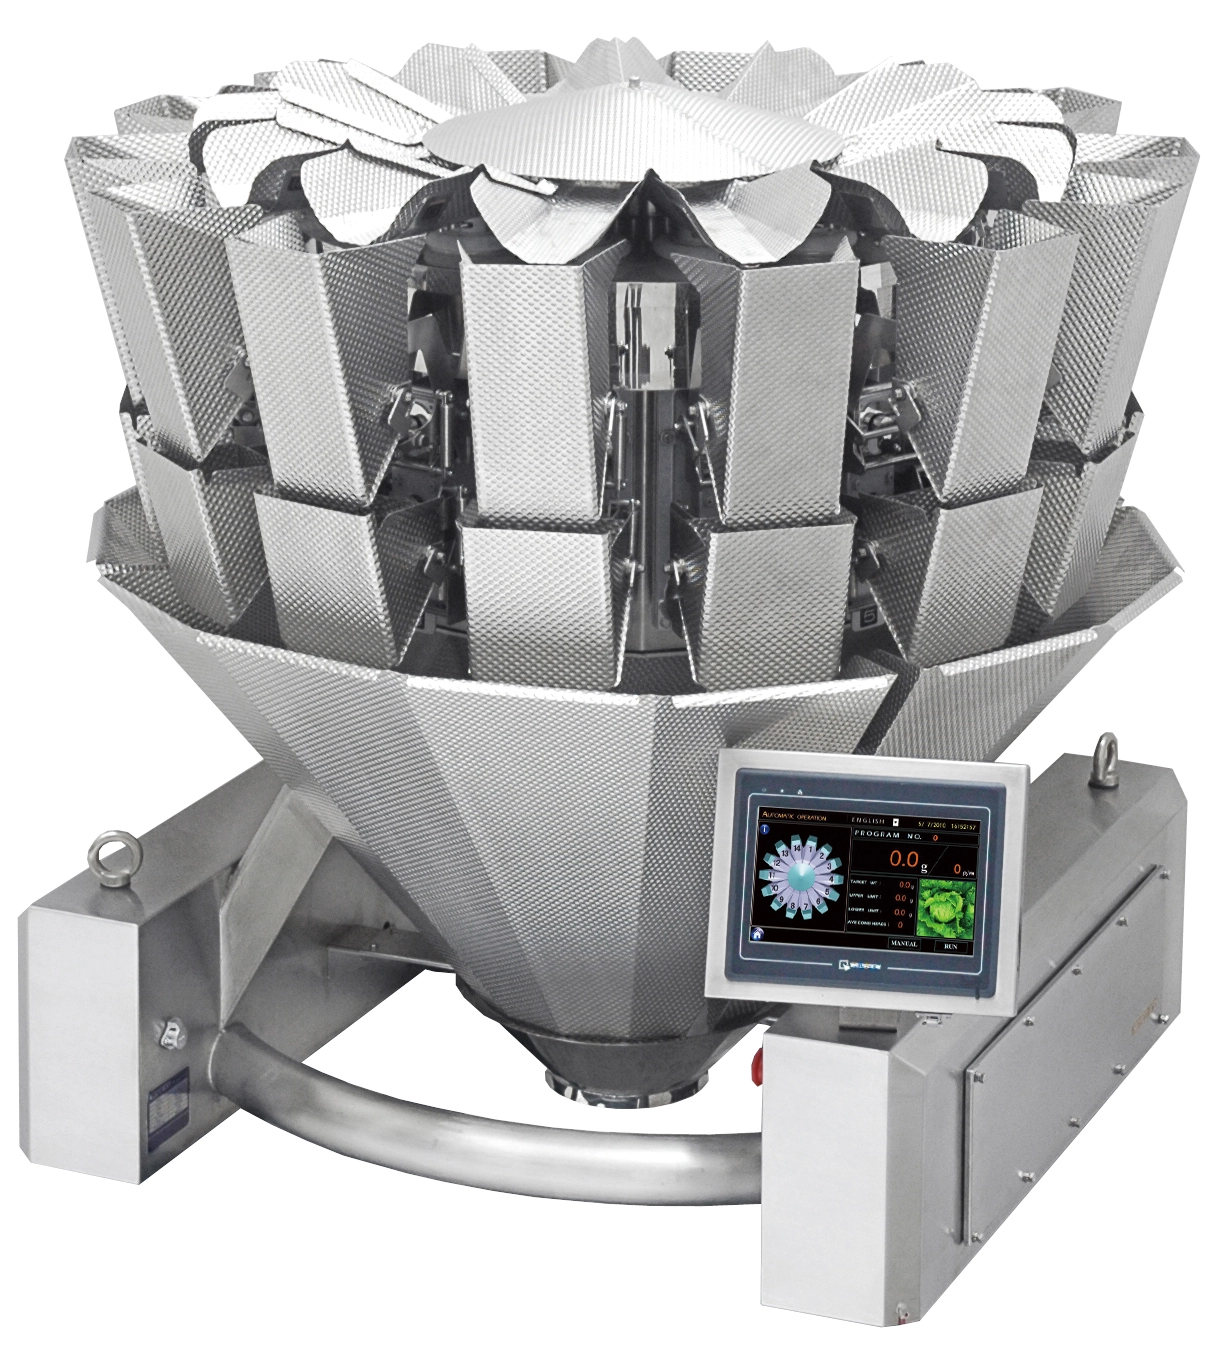 A PLUS SERIES 10 & 14 HEADS WEIGHER